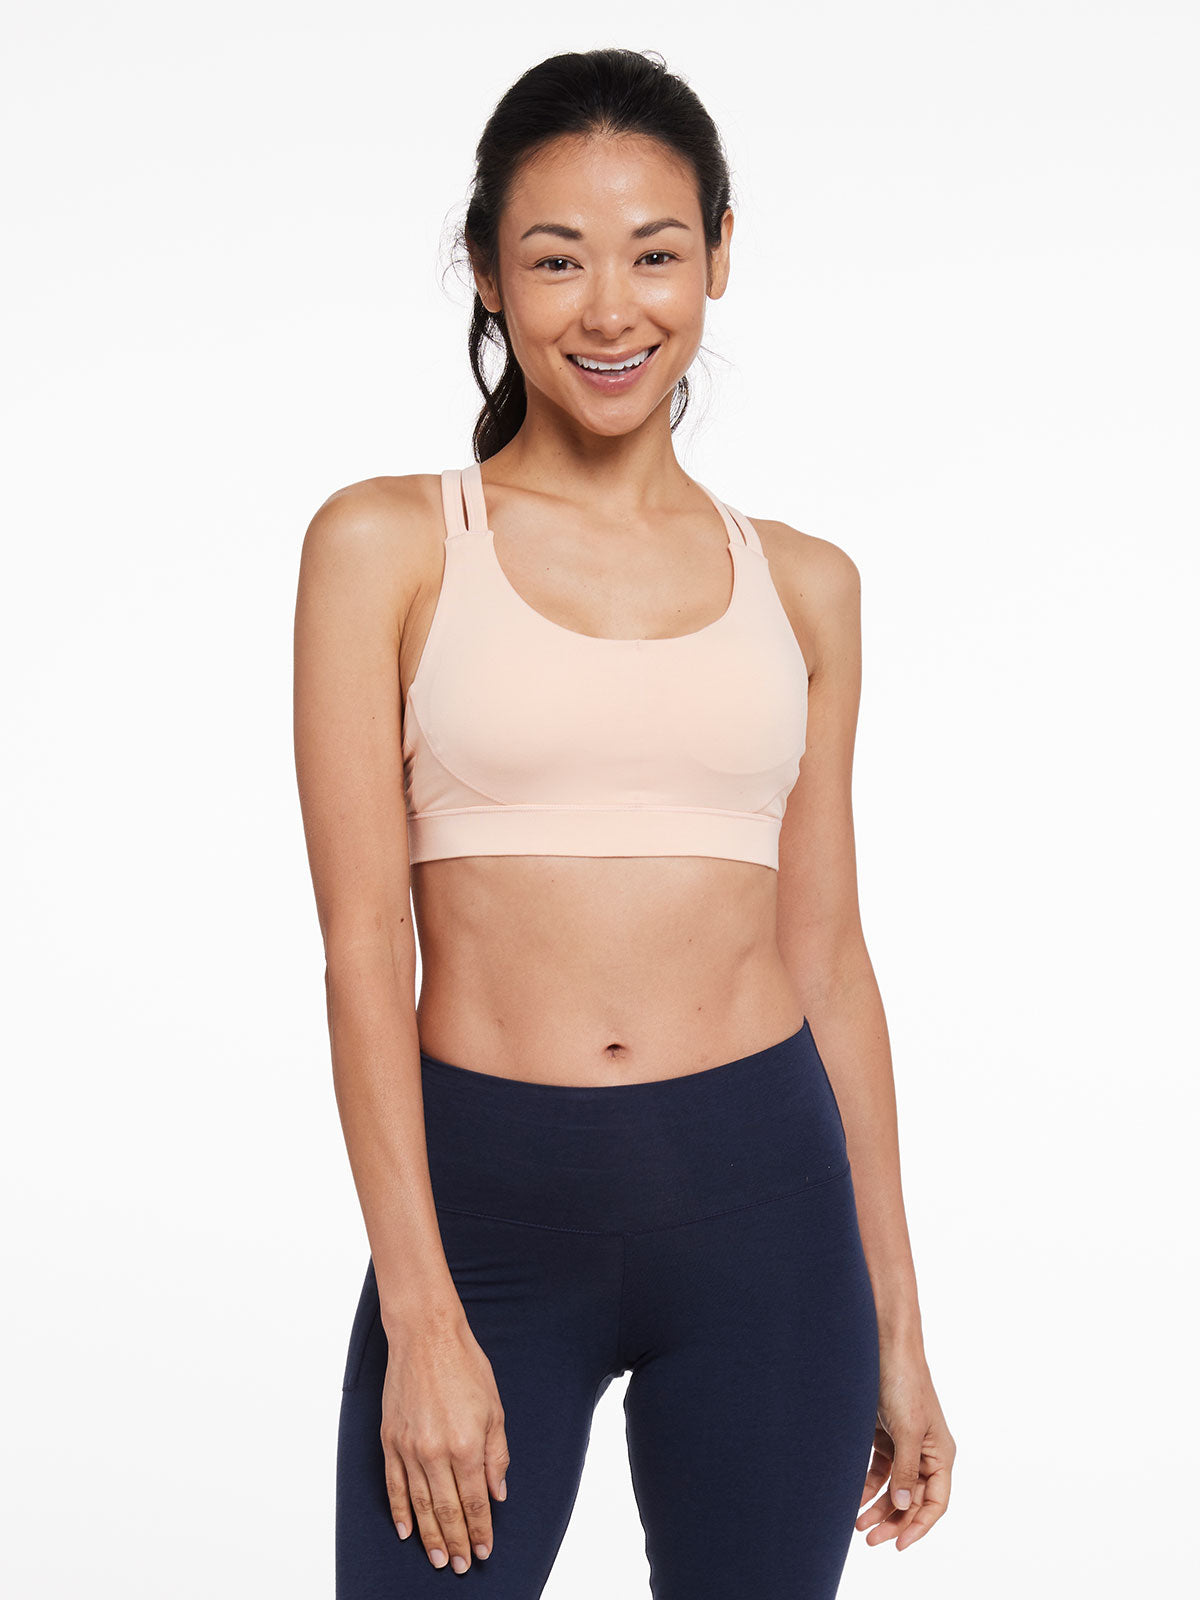 Running Bare Activewear Sale - Sports Bras and Workout Tops Up to